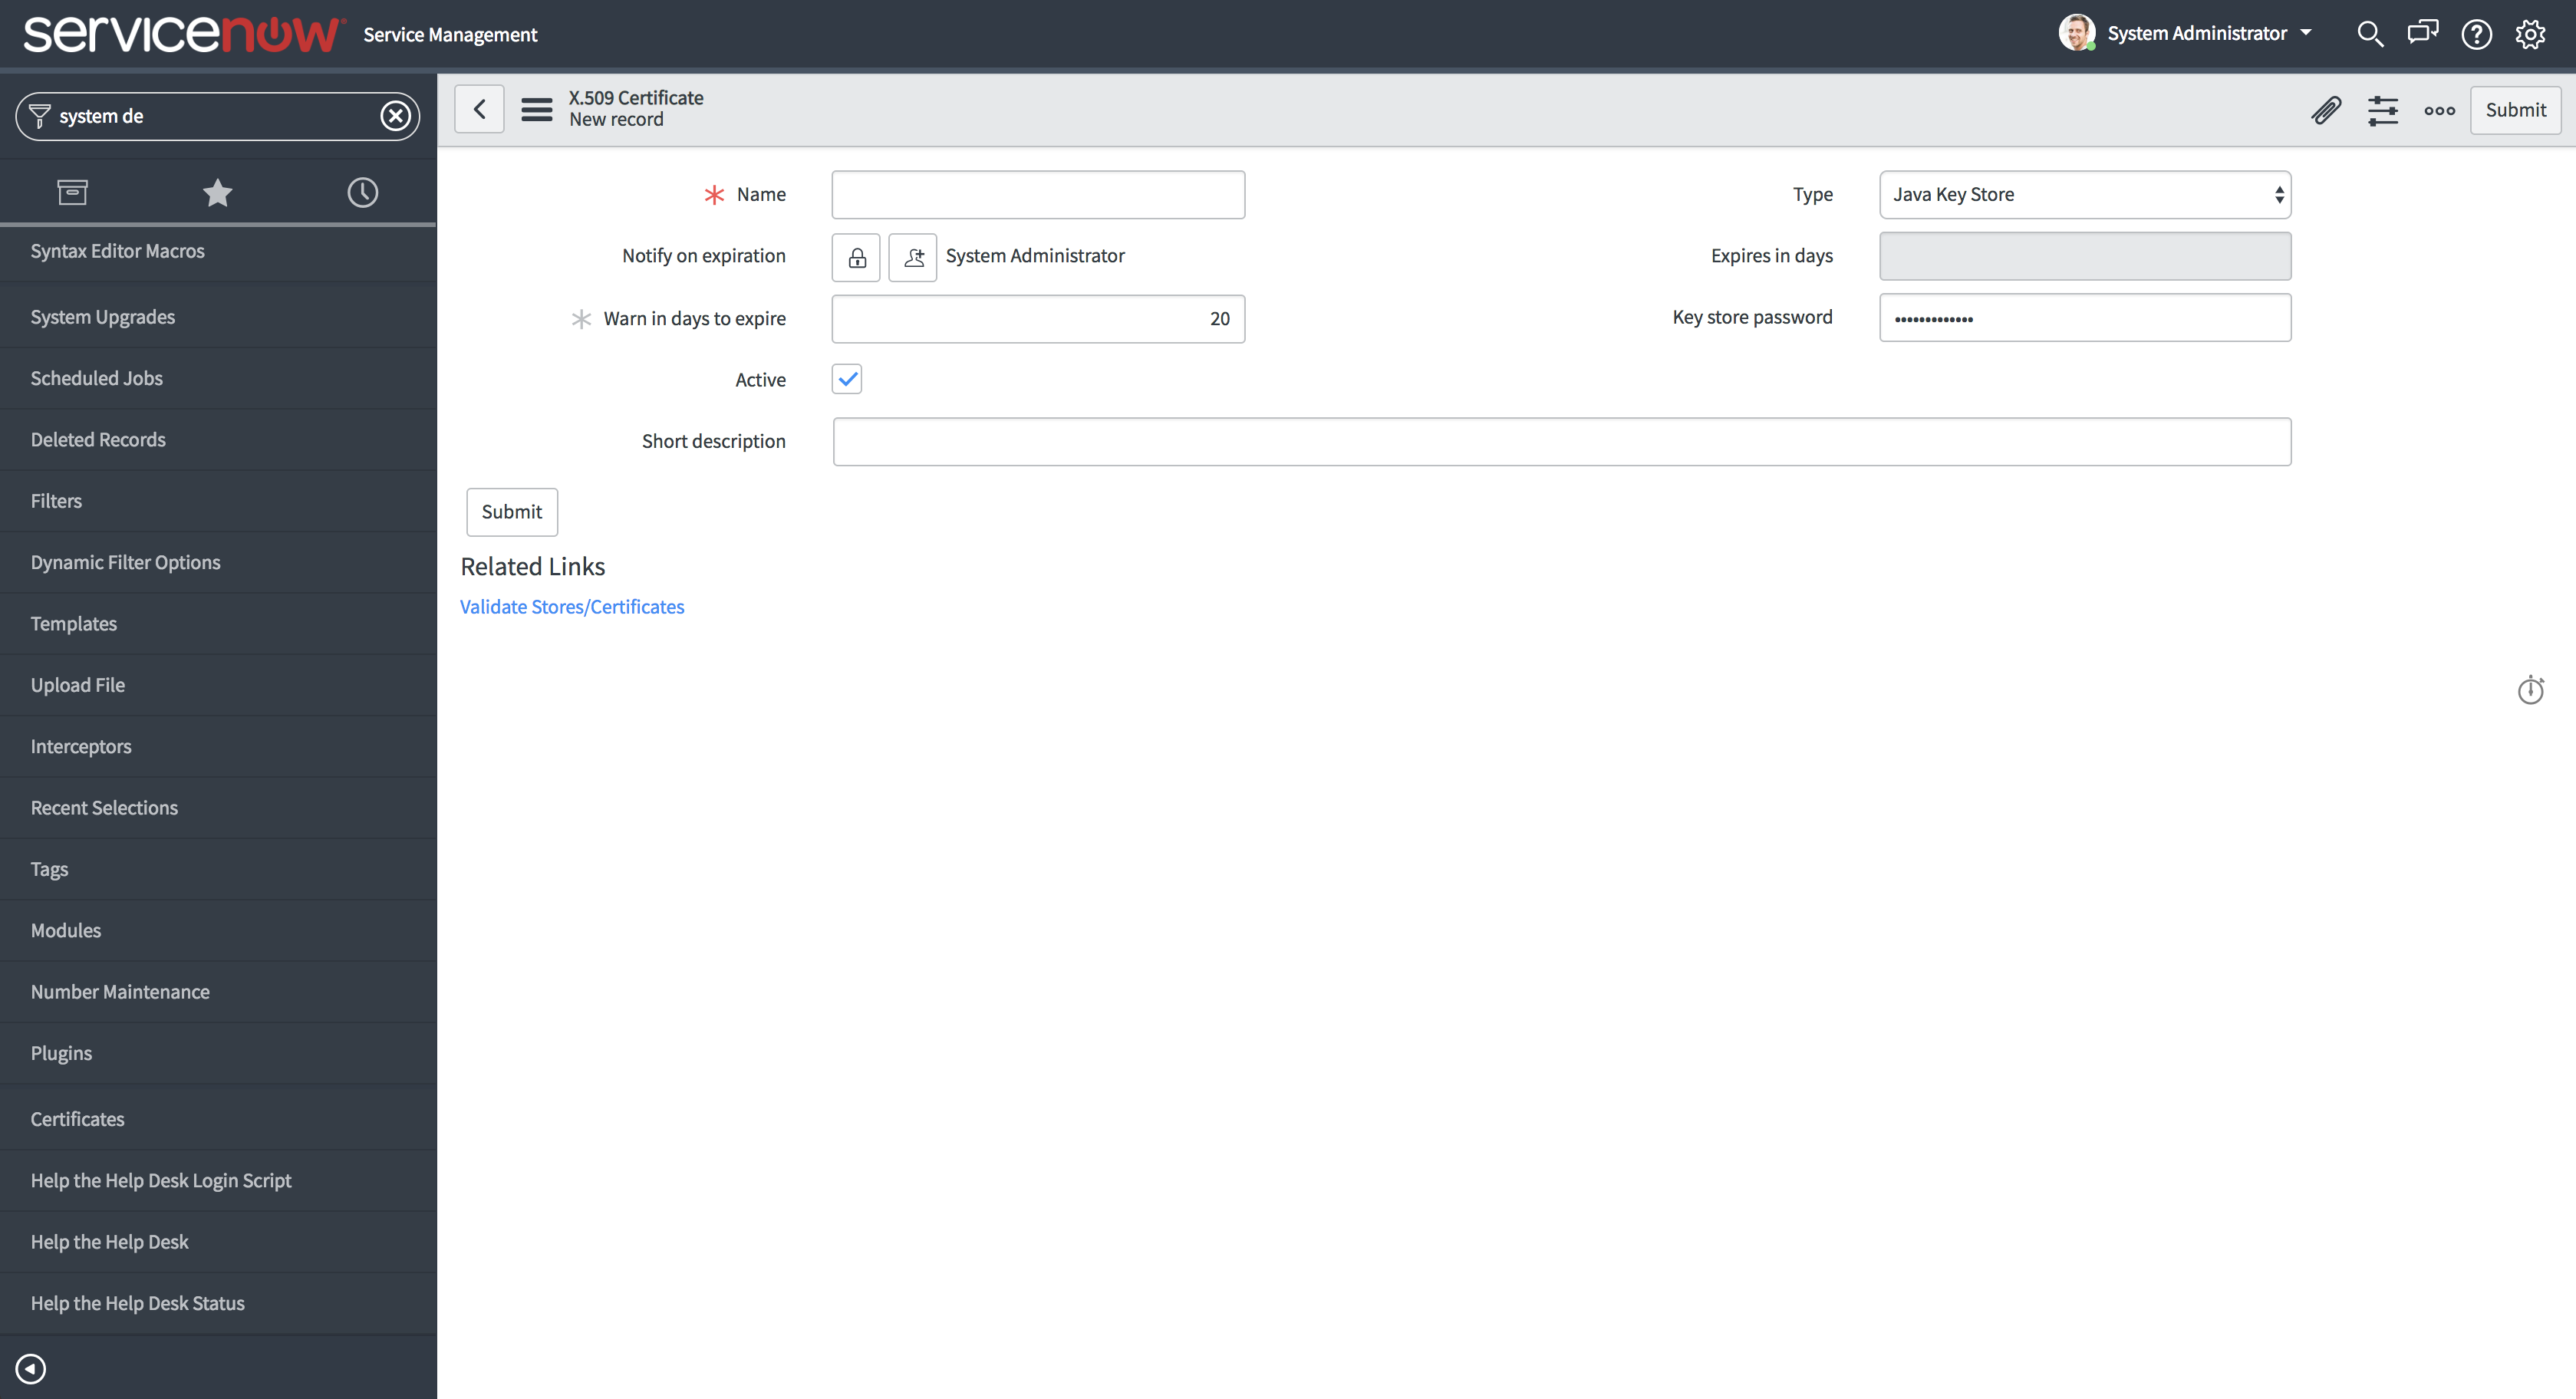 Integrating OpManager with ServiceNow using 3rd party / self signed SSL